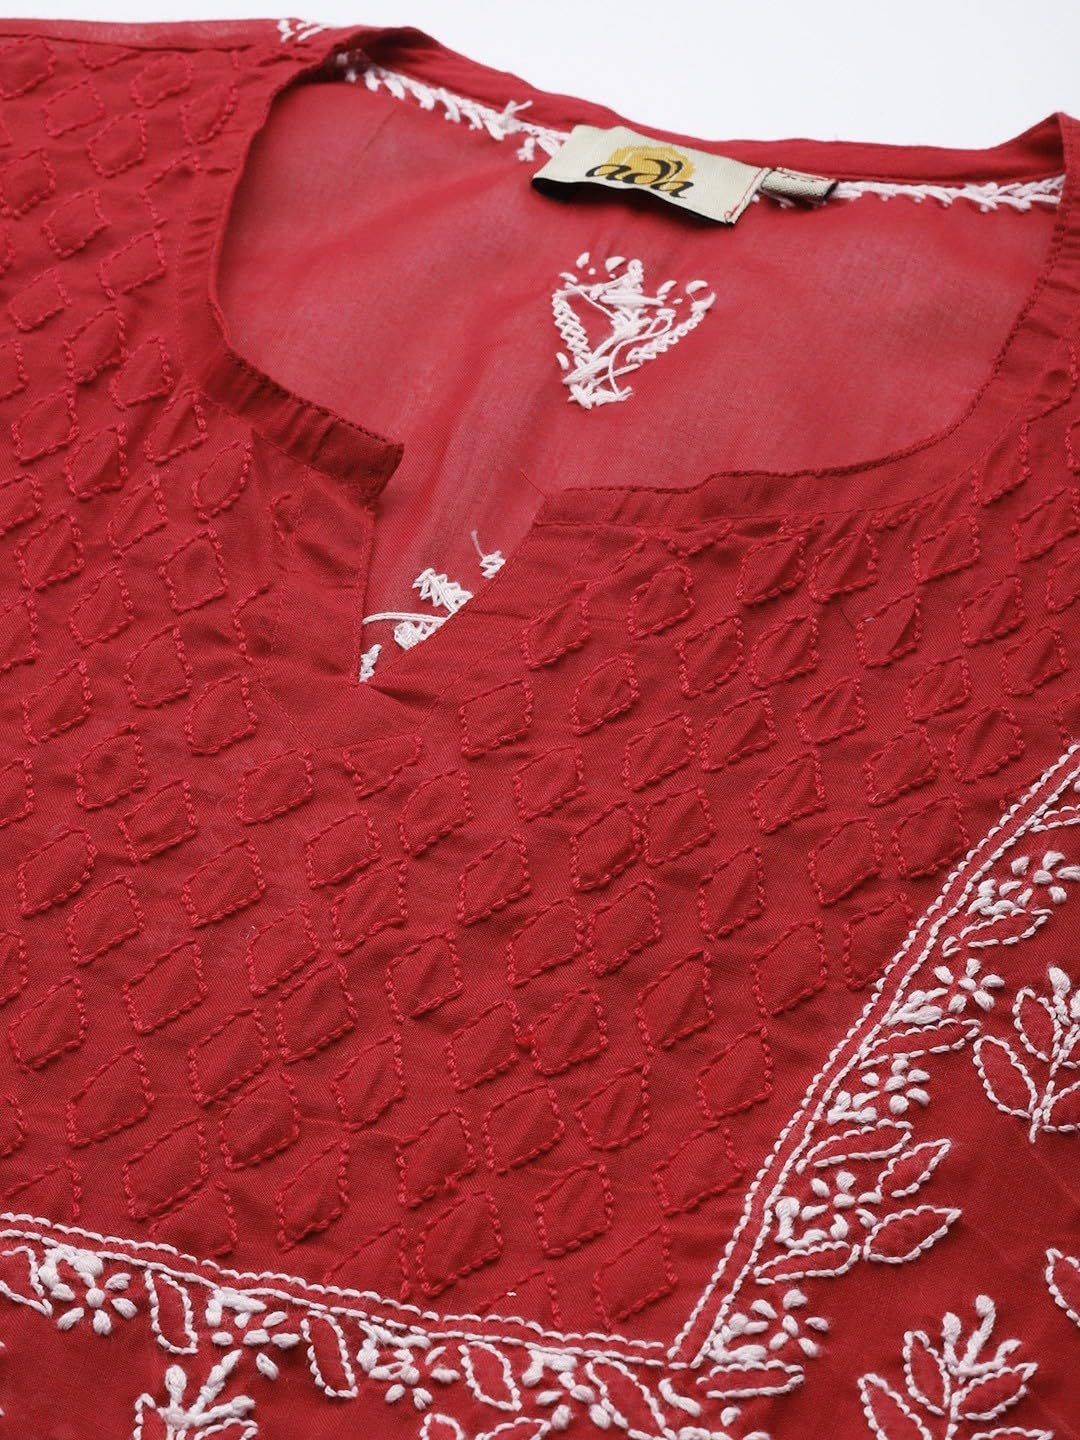 Ada Hand Embroidered Cotton Straight Top Tunic Lucknowi Chikankari Short Kurti for Women A911213 Red (S)